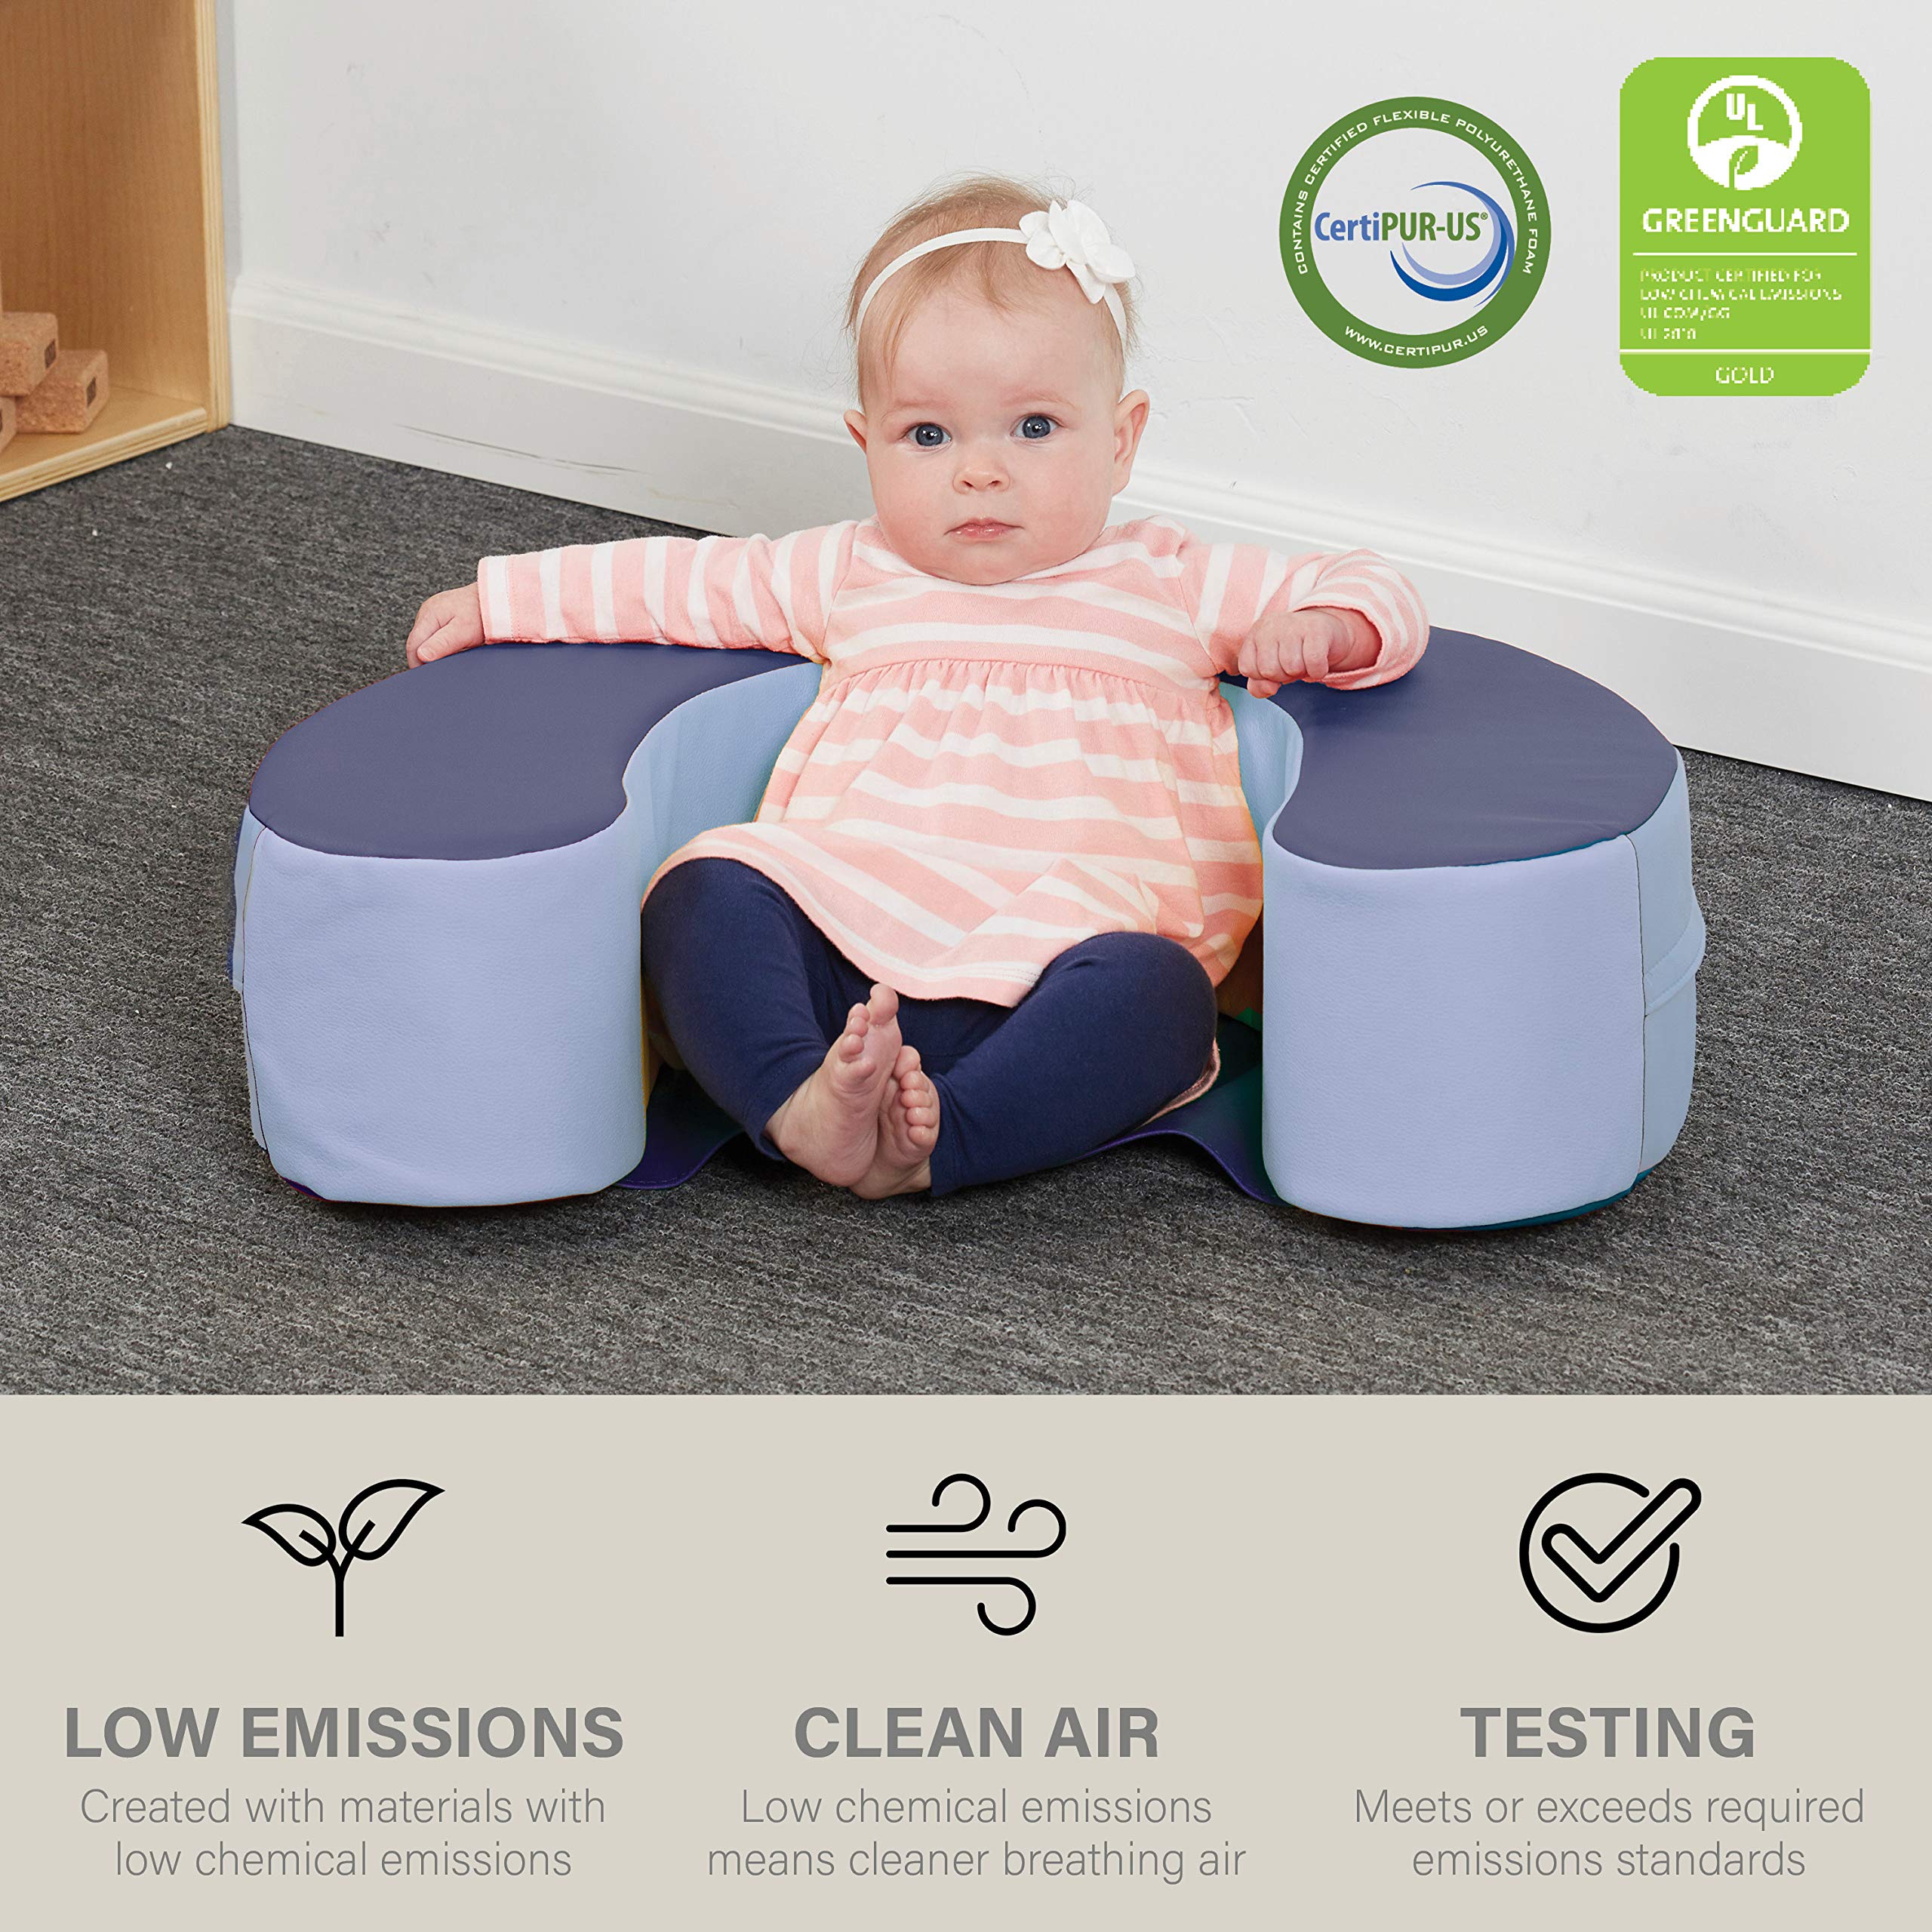 Factory Direct Partners 10423-NVPB SoftScape Sit and Support Ring for Babies and Infants, Cushioned Foam Floor Seat with Non-Slip Bottom for Nursey, Playroom, Daycare - Navy/Powder Blue